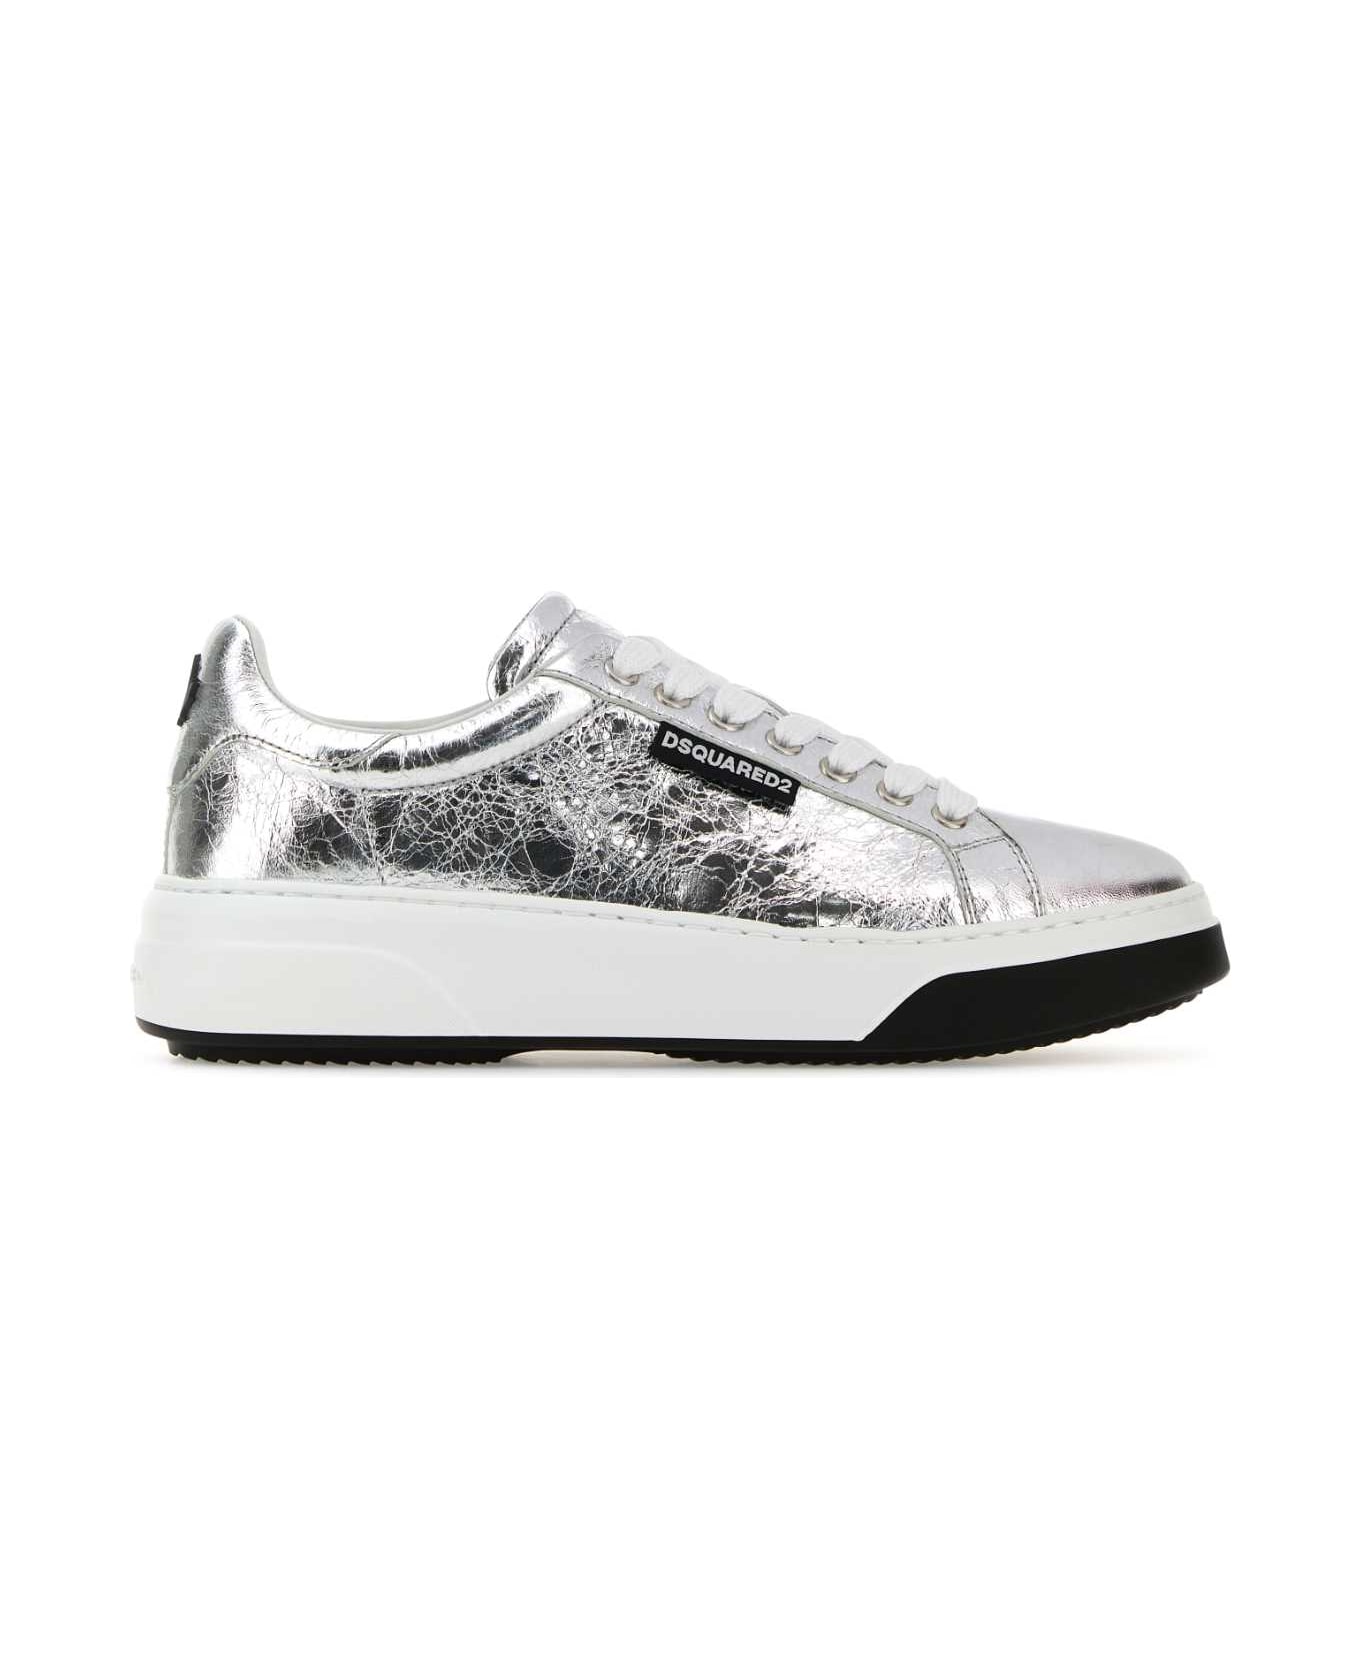 Dsquared2 Bumper Sneakers - ARGENTO スニーカー